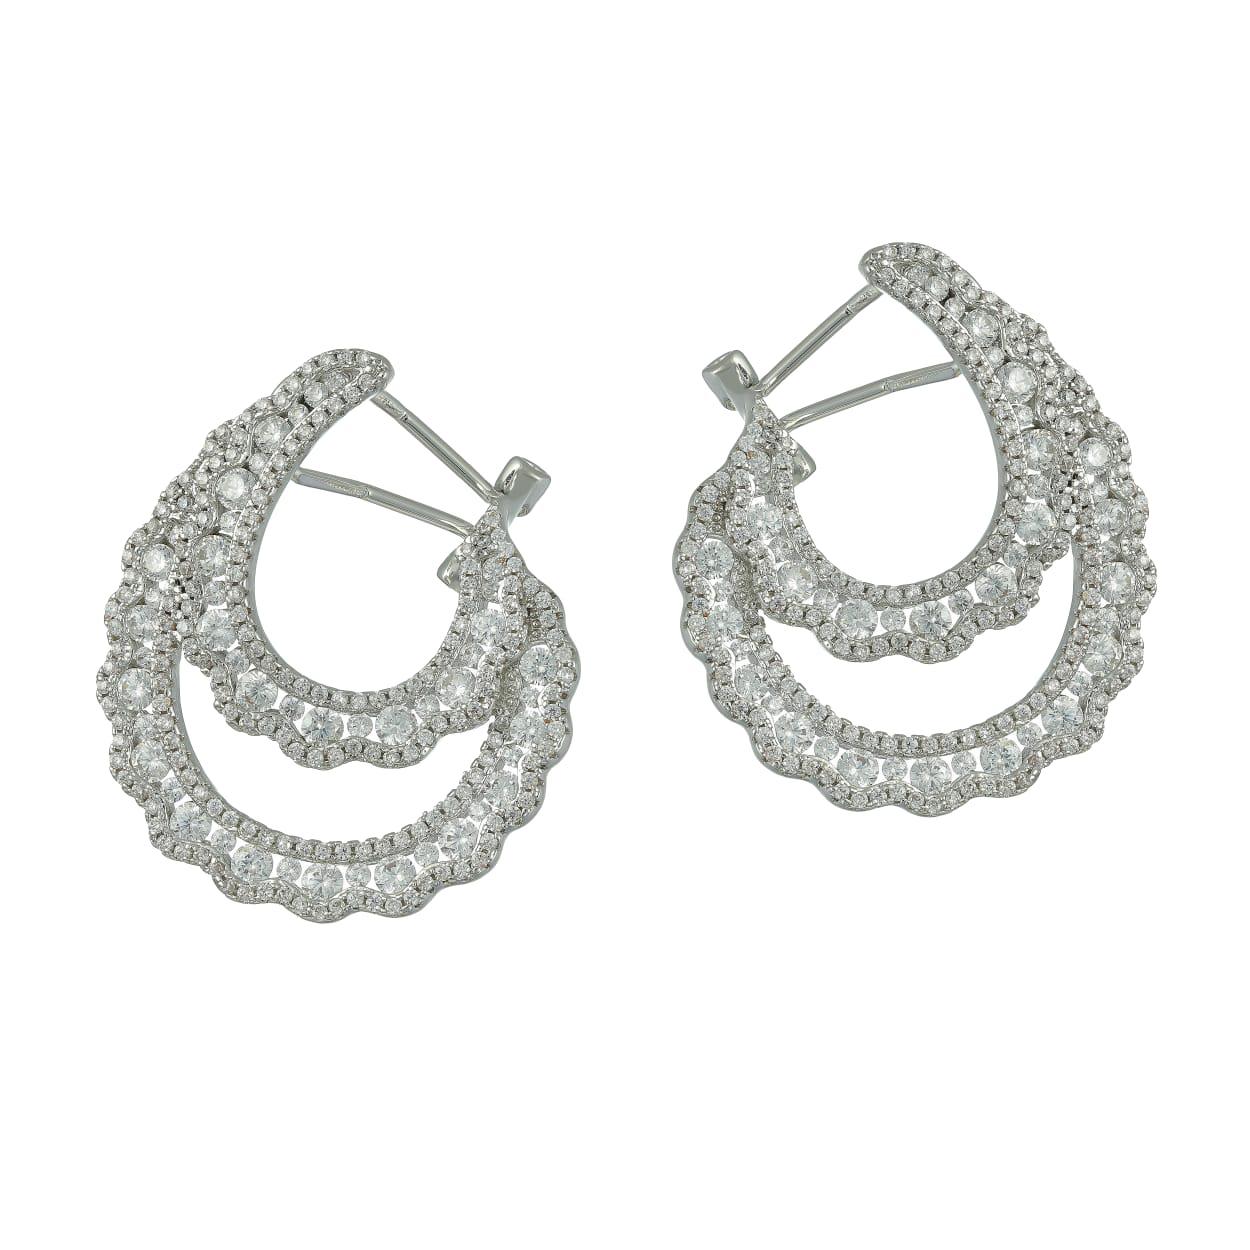 Astradina Curved Evening Earrings